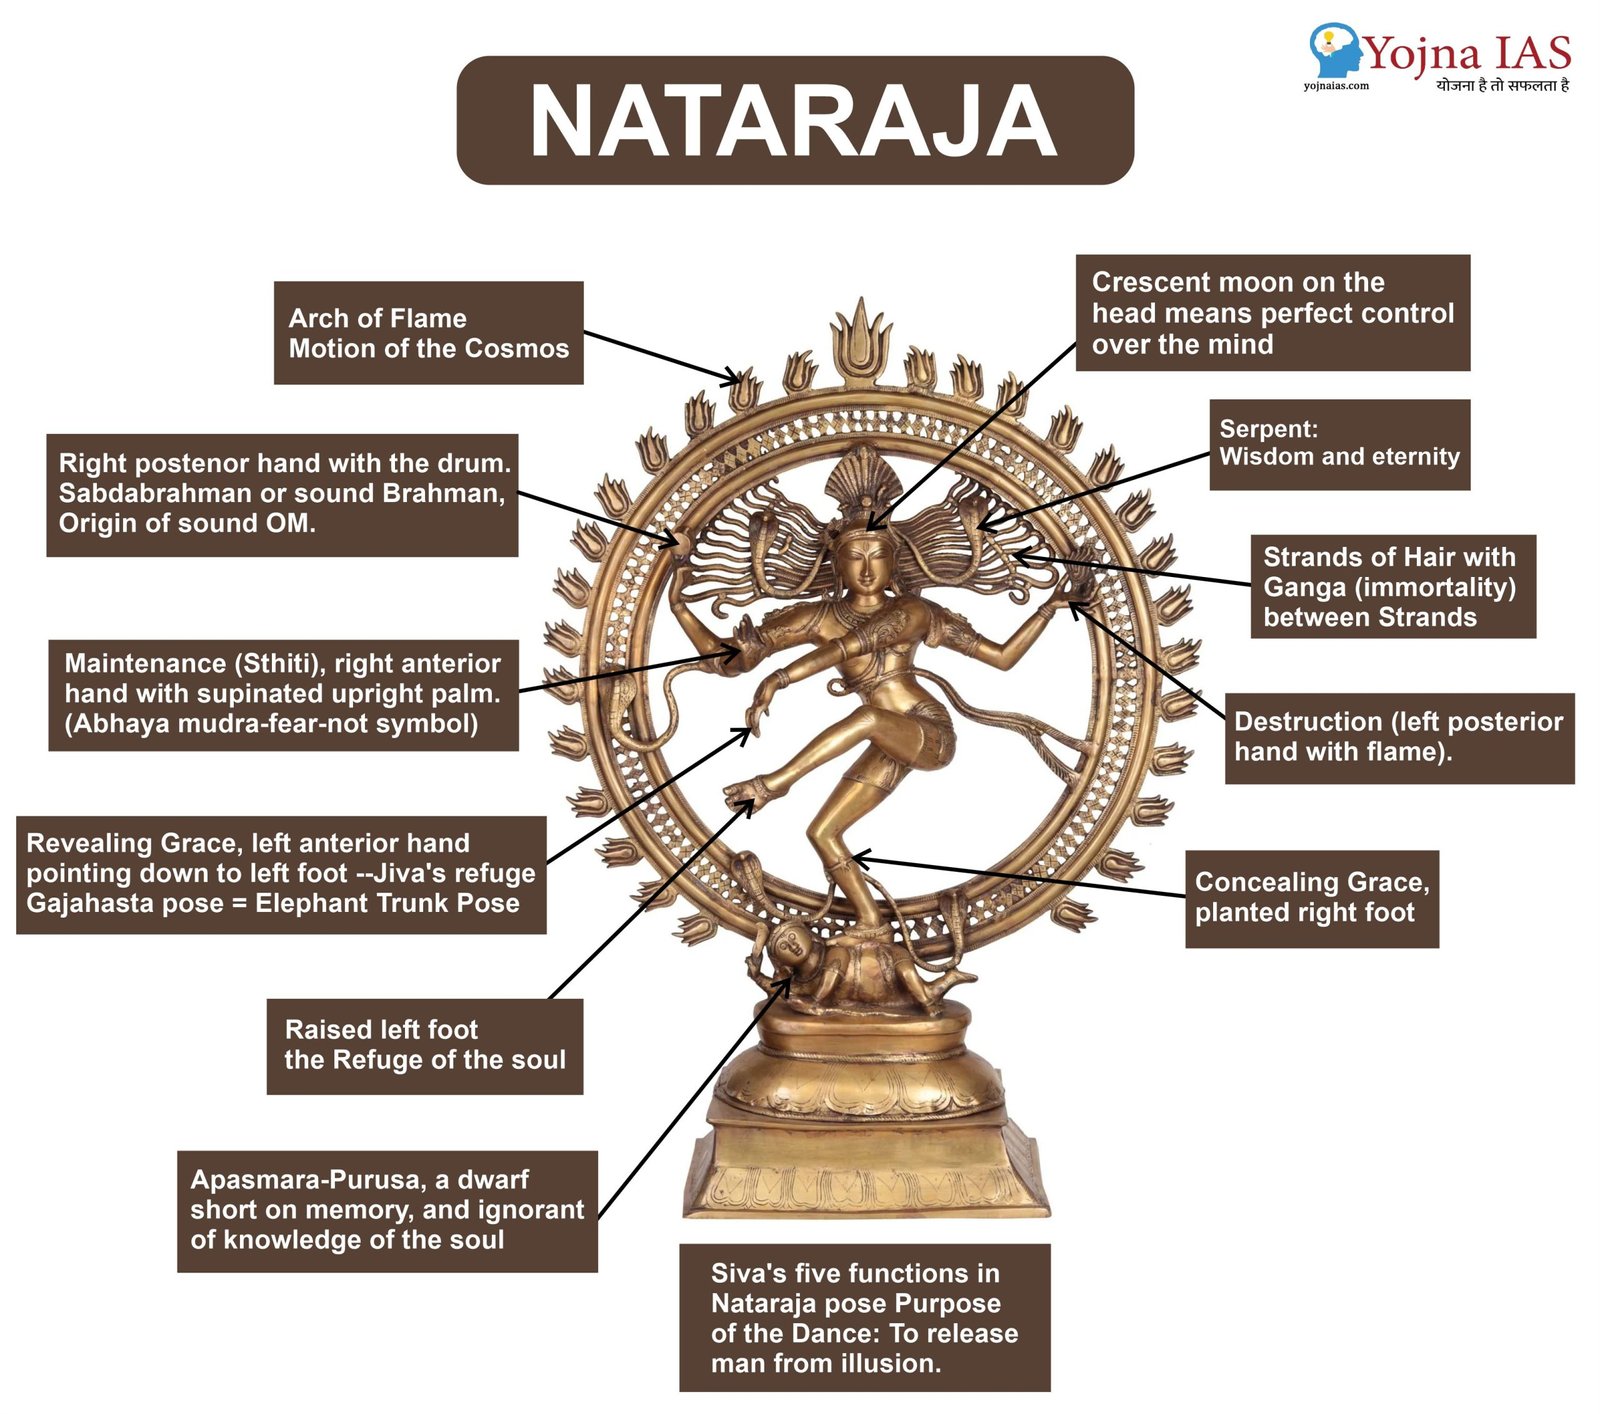 The Lord of Dance: History and symbolism of Shiva's Nataraja form